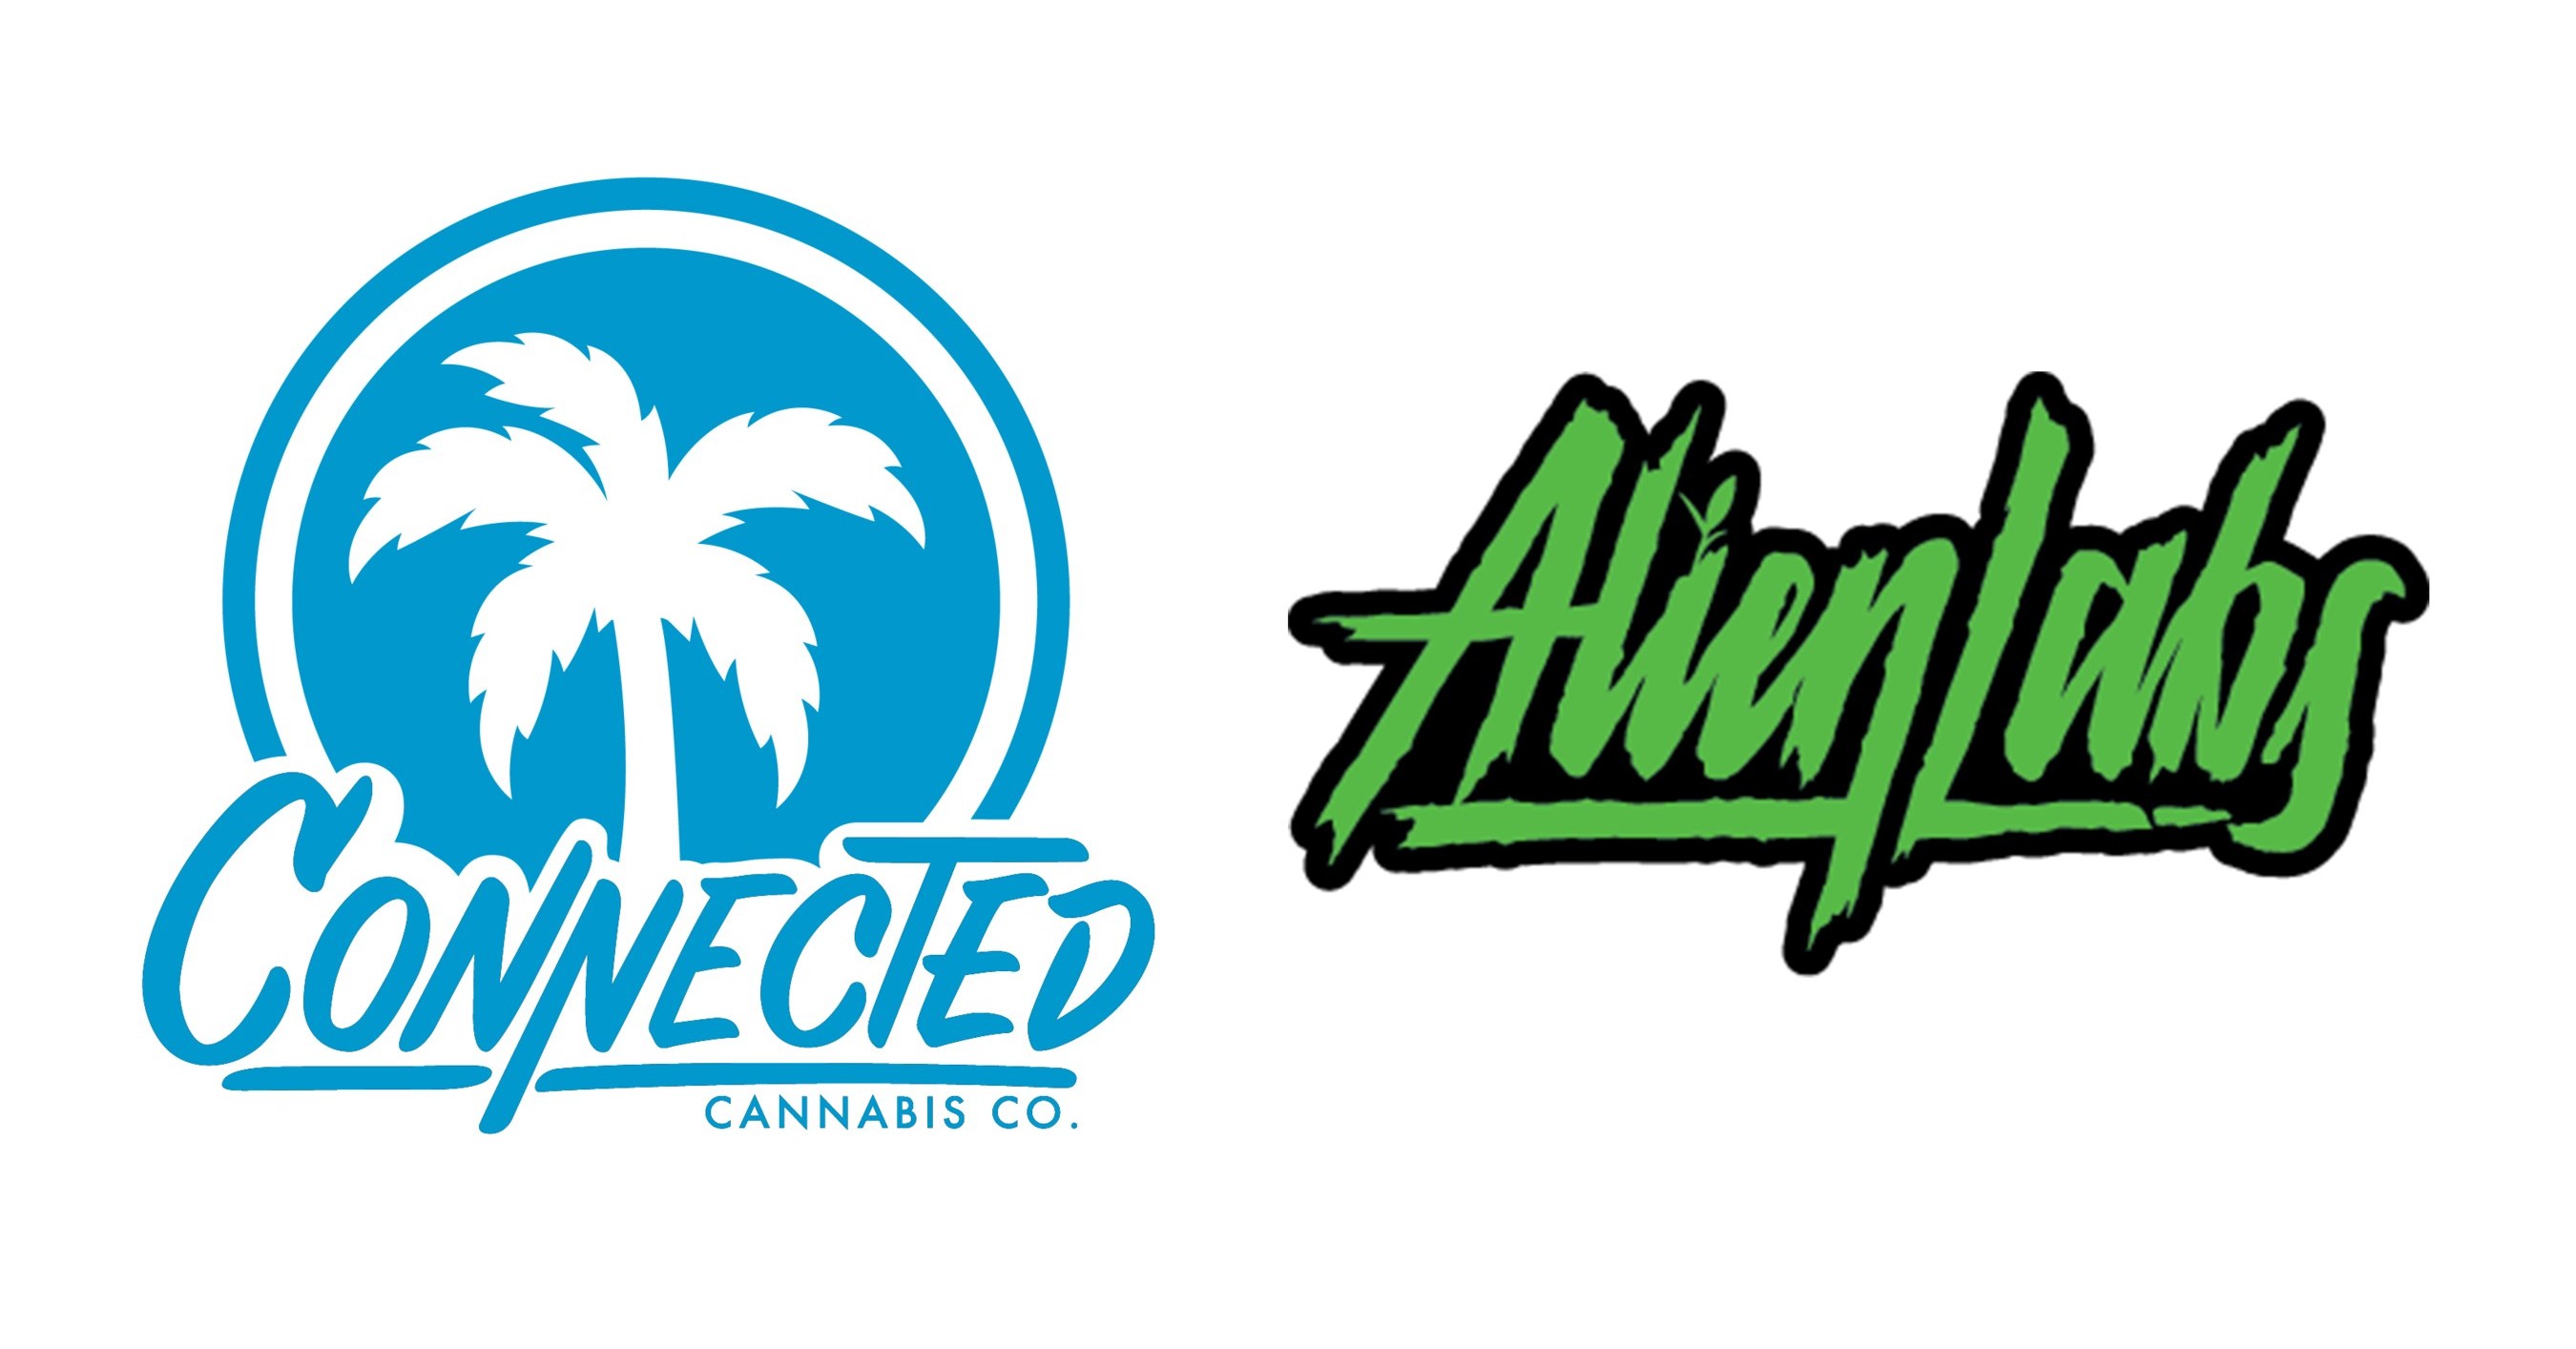 TRULIEVE ANNOUNCES EXCLUSIVE PARTNERSHIP IN FLORIDA WITH CONNECTED CANNABIS &AMP;AMP; ALIENLABS - DEC 15, 2022